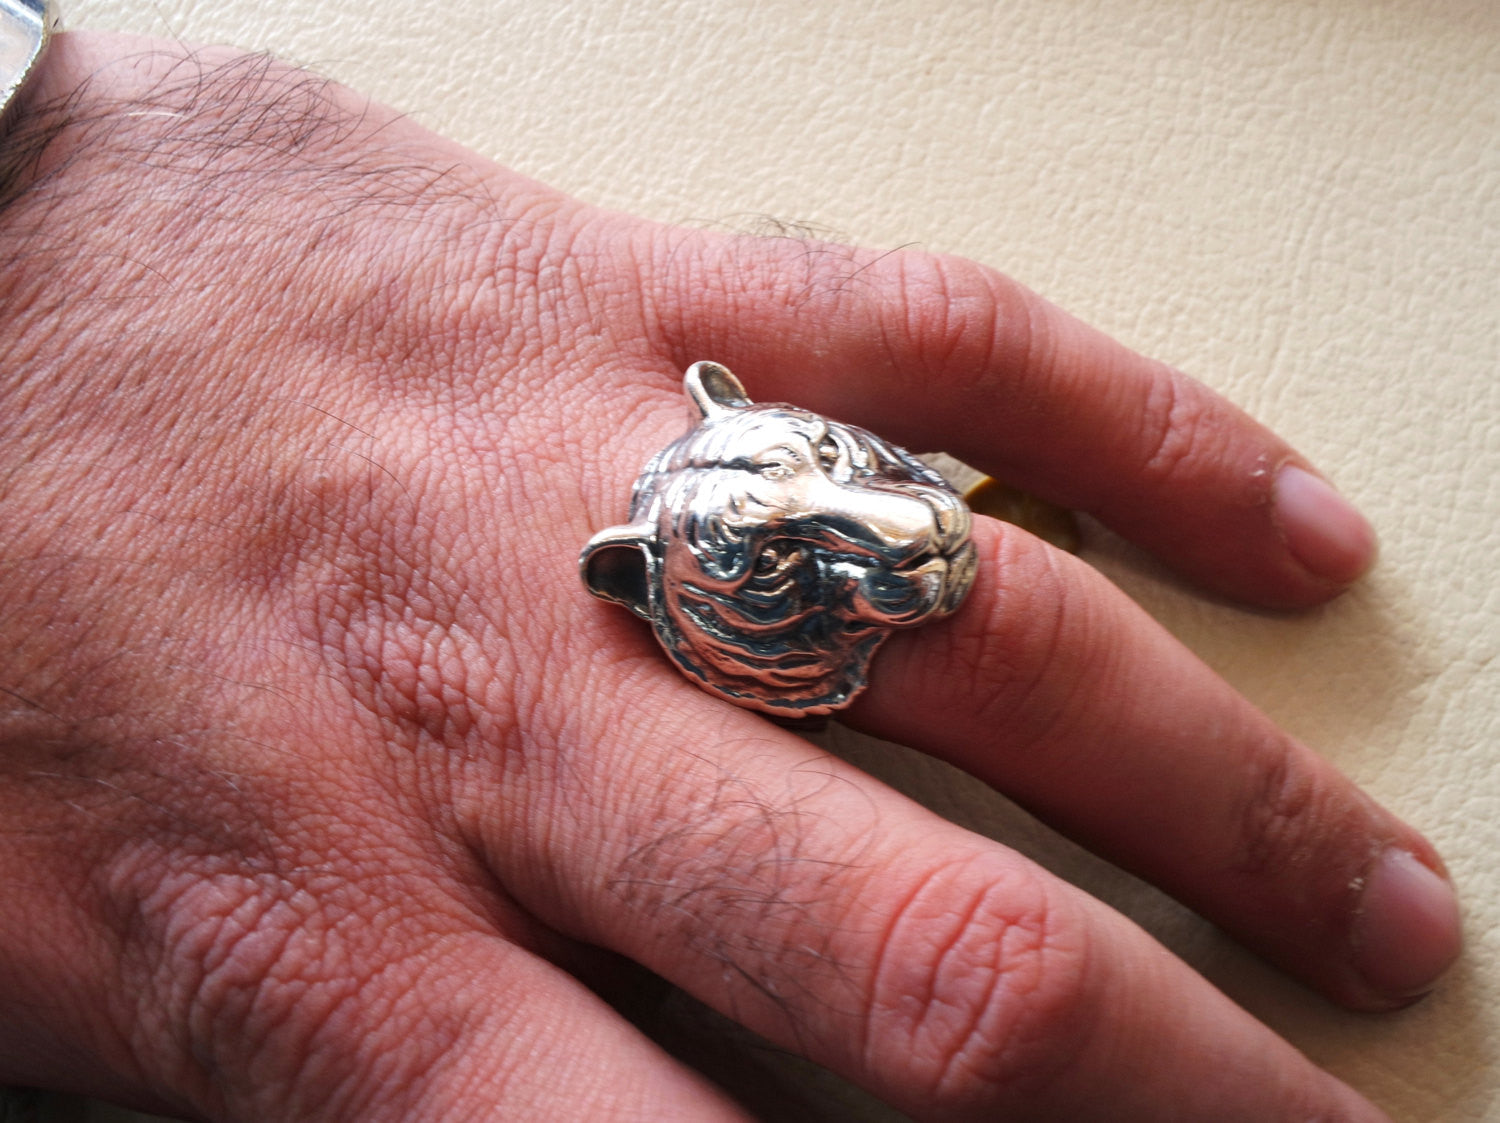 huge bengal tiger very heavy sterling silver 925 man biker ring all sizes handmade animal head jewelry fast shipping detailed craftsmanship